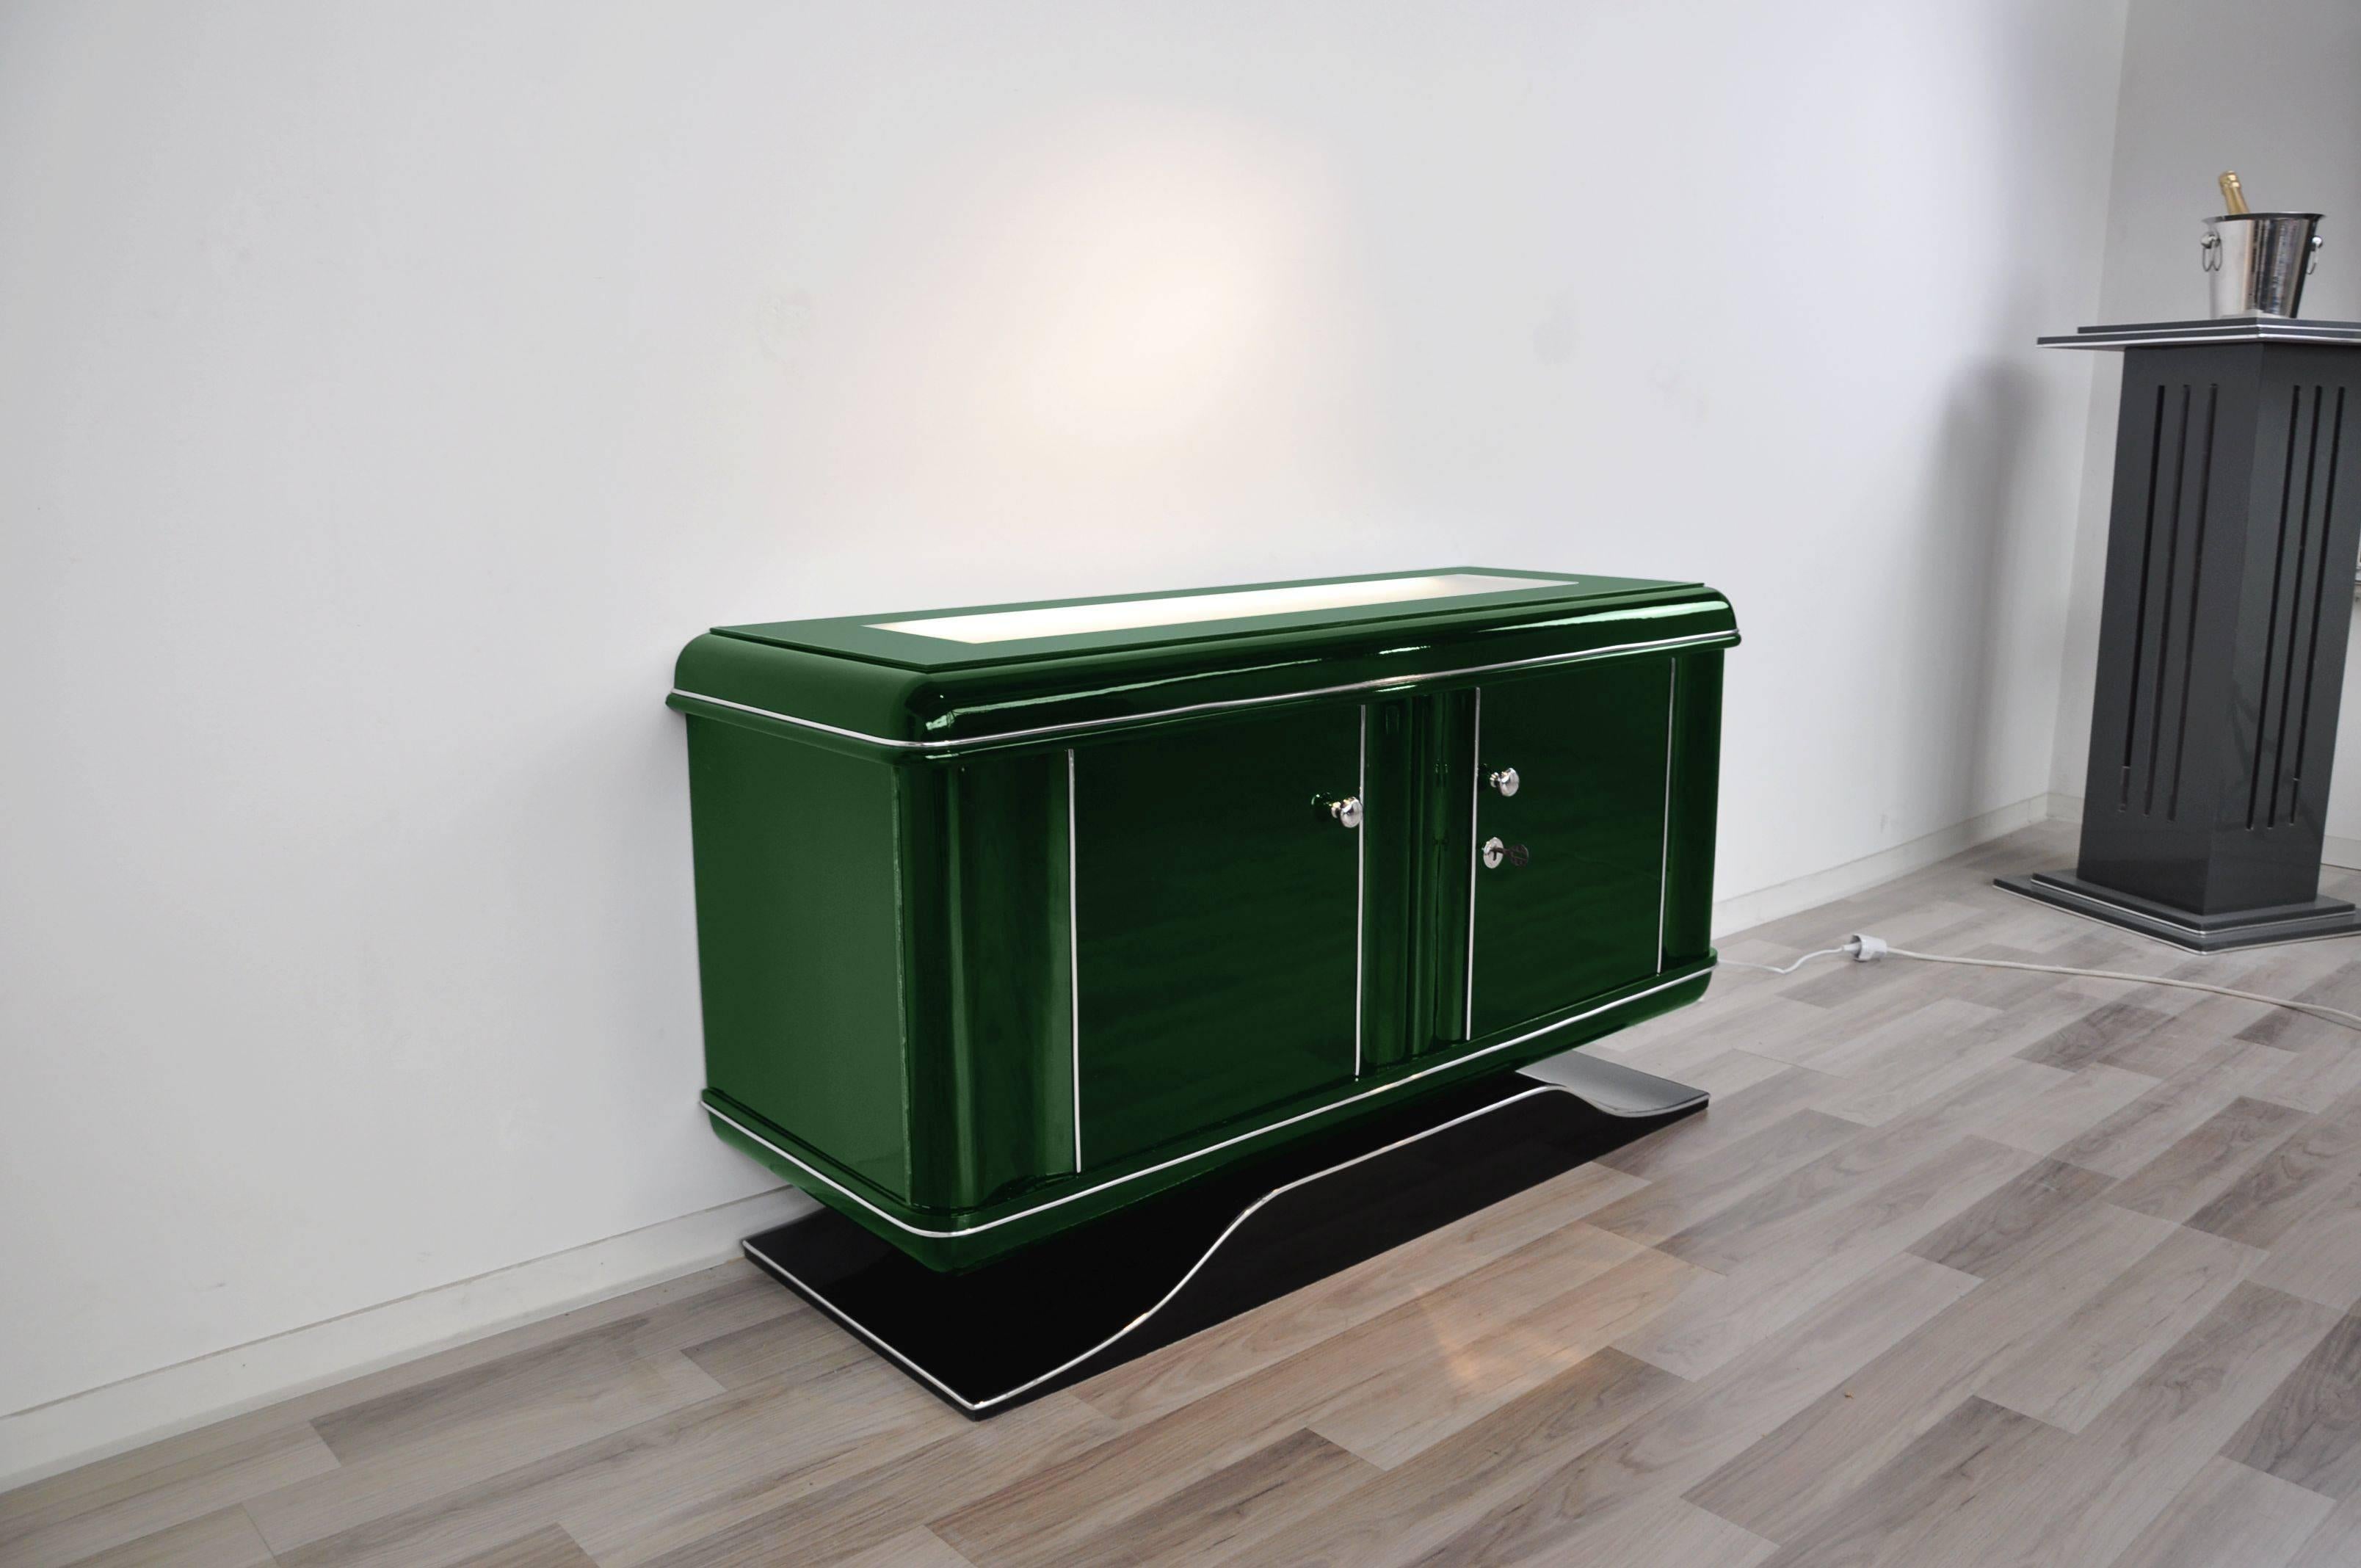 Illuminated Art Deco dresser or commode with a wonderful paintjob. This amazing piece of furniture offers a great color combination with a matte white interior and a Jaguar Racing Green exterior. The top milk glass plate is illuminated from